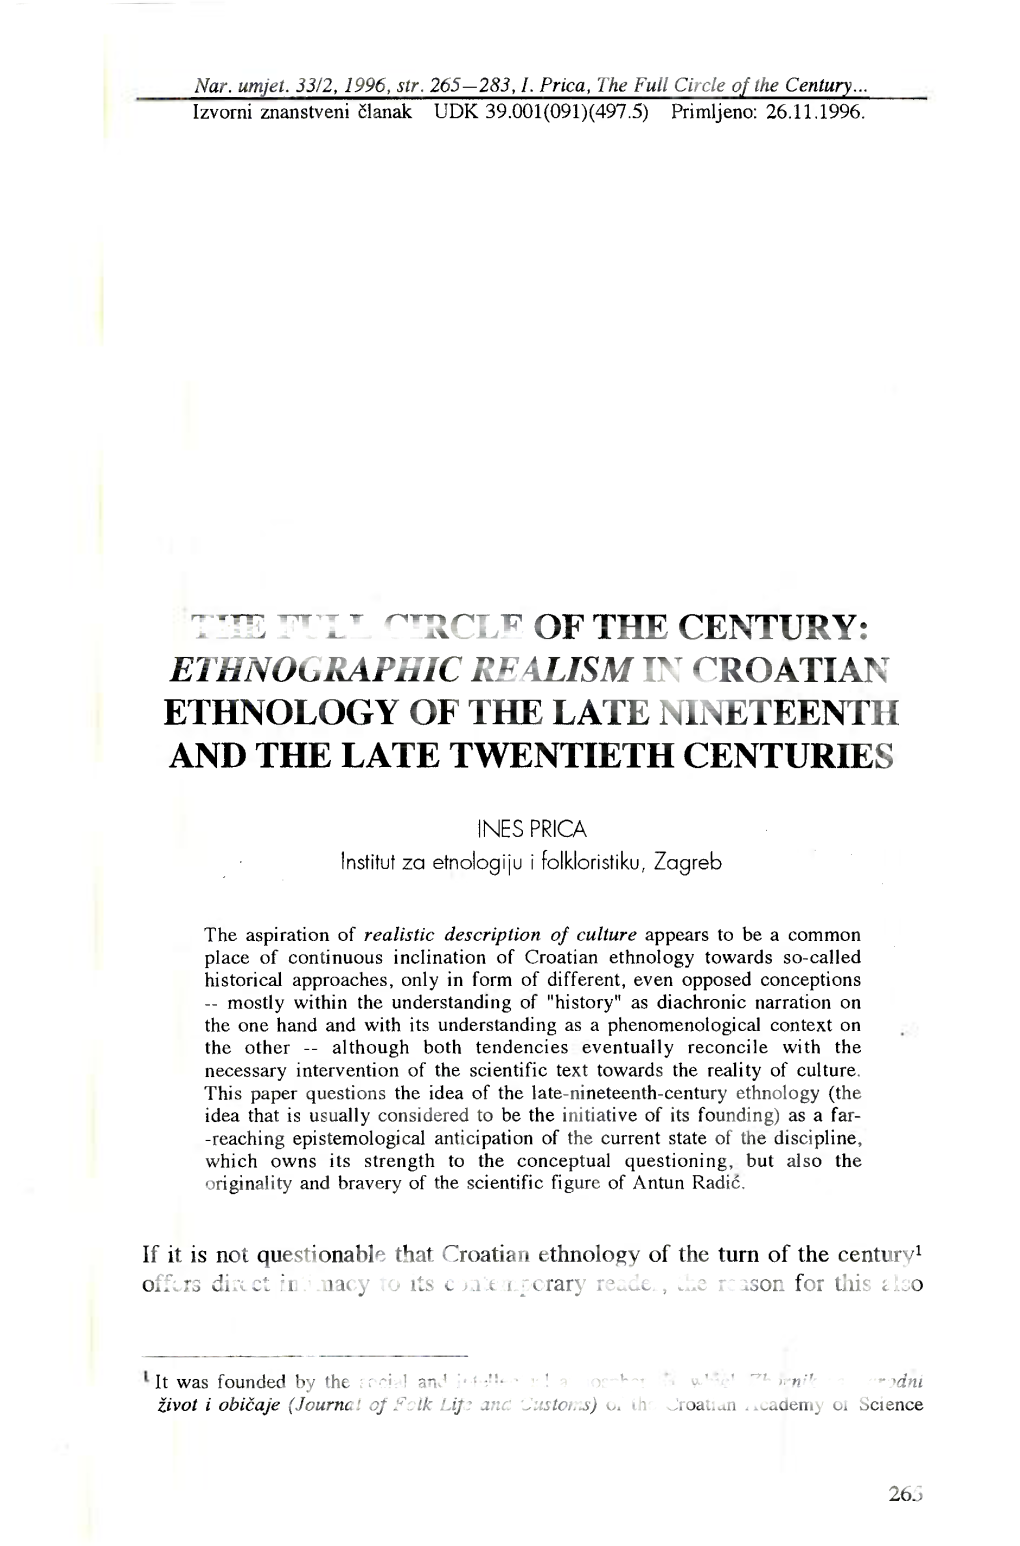 The Full Circle of the Century: Ethnographic Realism in Croatian Ethnology of the Late Nineteenth and the Late Twentieth Centuries